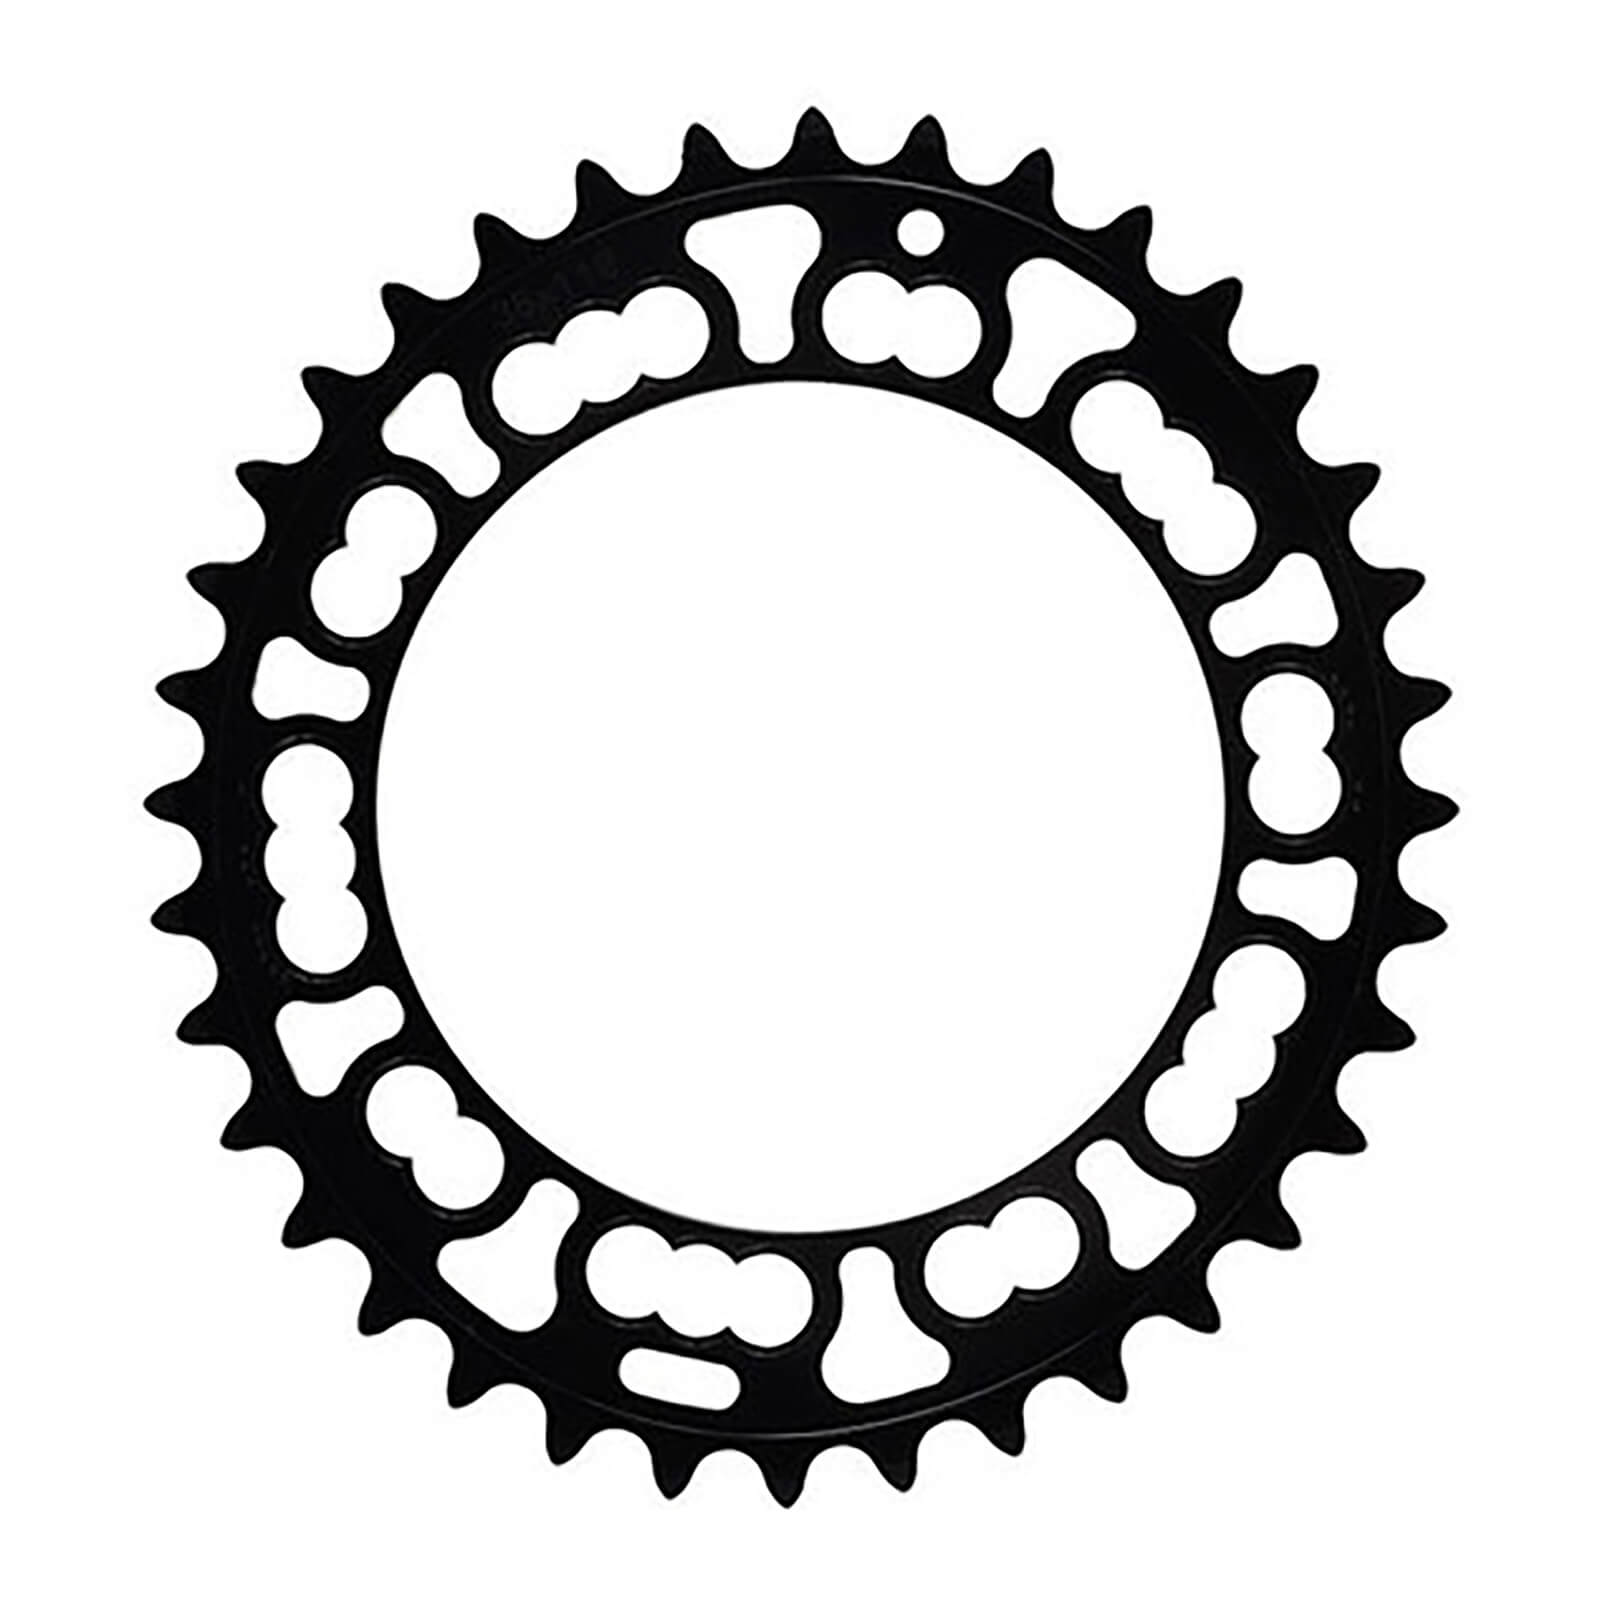 Image of Rotor Q Inner Chainring 5 Bolt - 36T - 110BCD